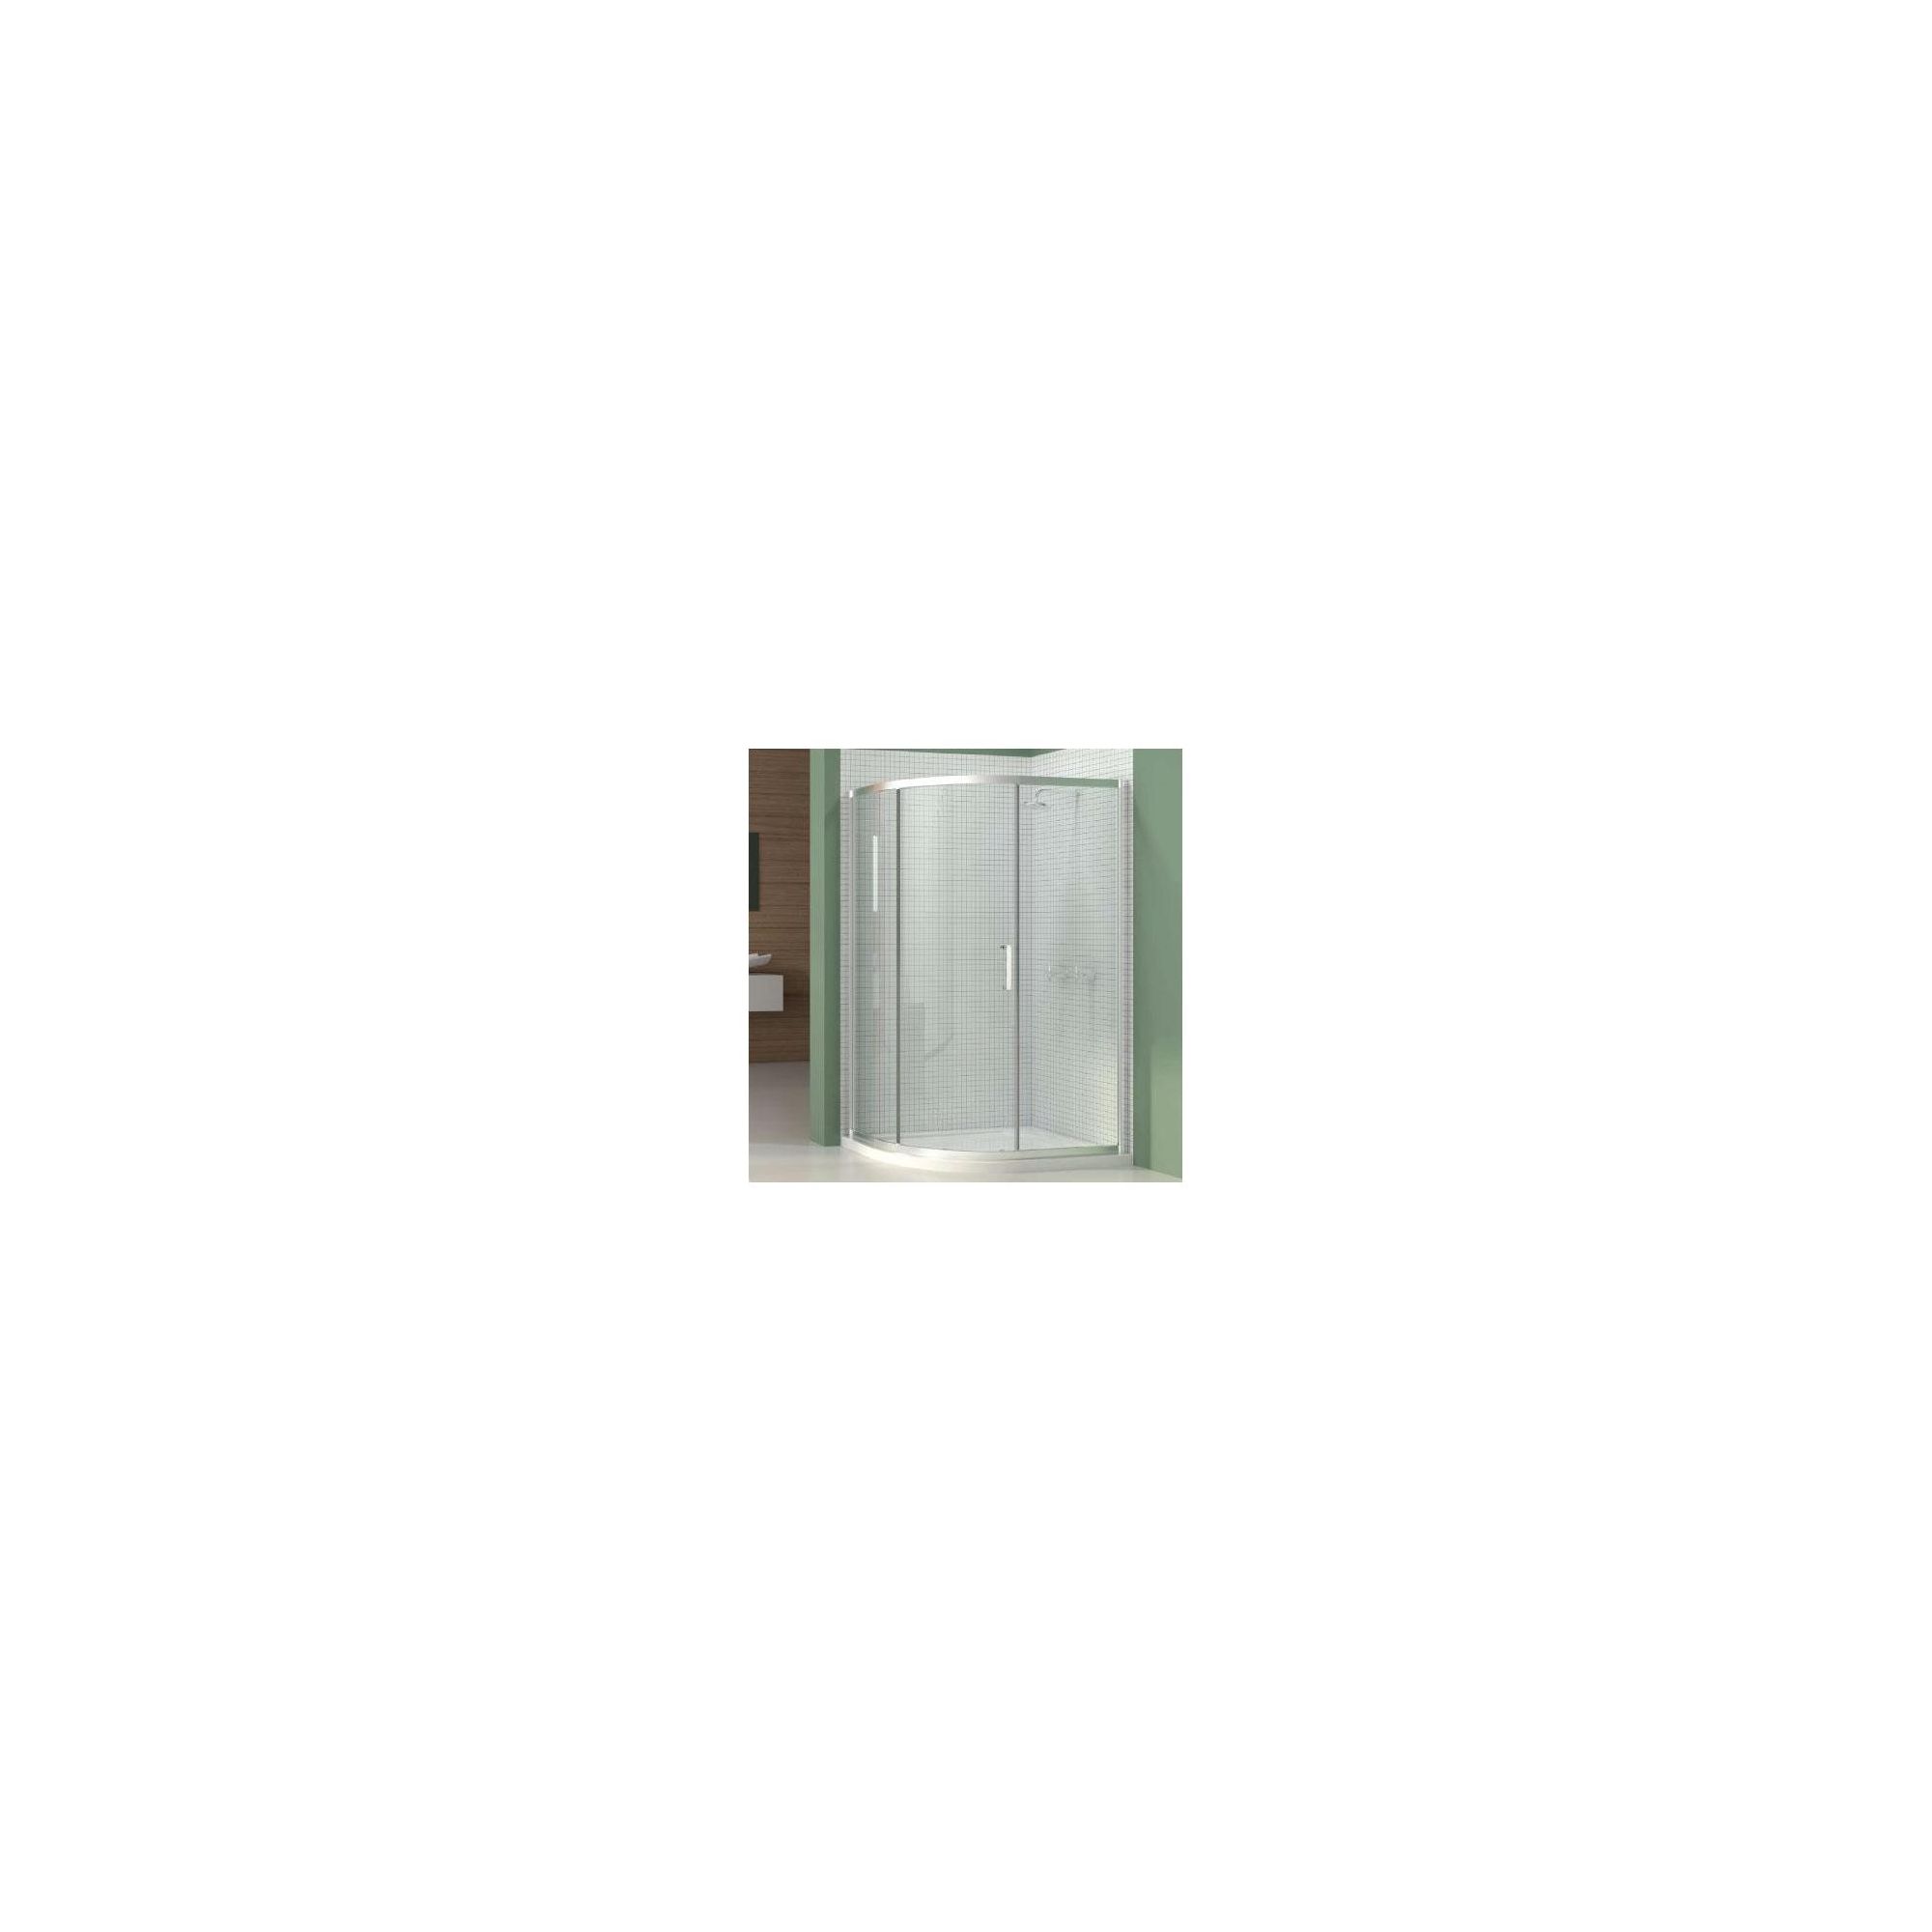 Merlyn Vivid Six Offset Quadrant Shower Enclosure, 900mm x 760mm, Left Handed, Low Profile Tray, 6mm Glass at Tesco Direct